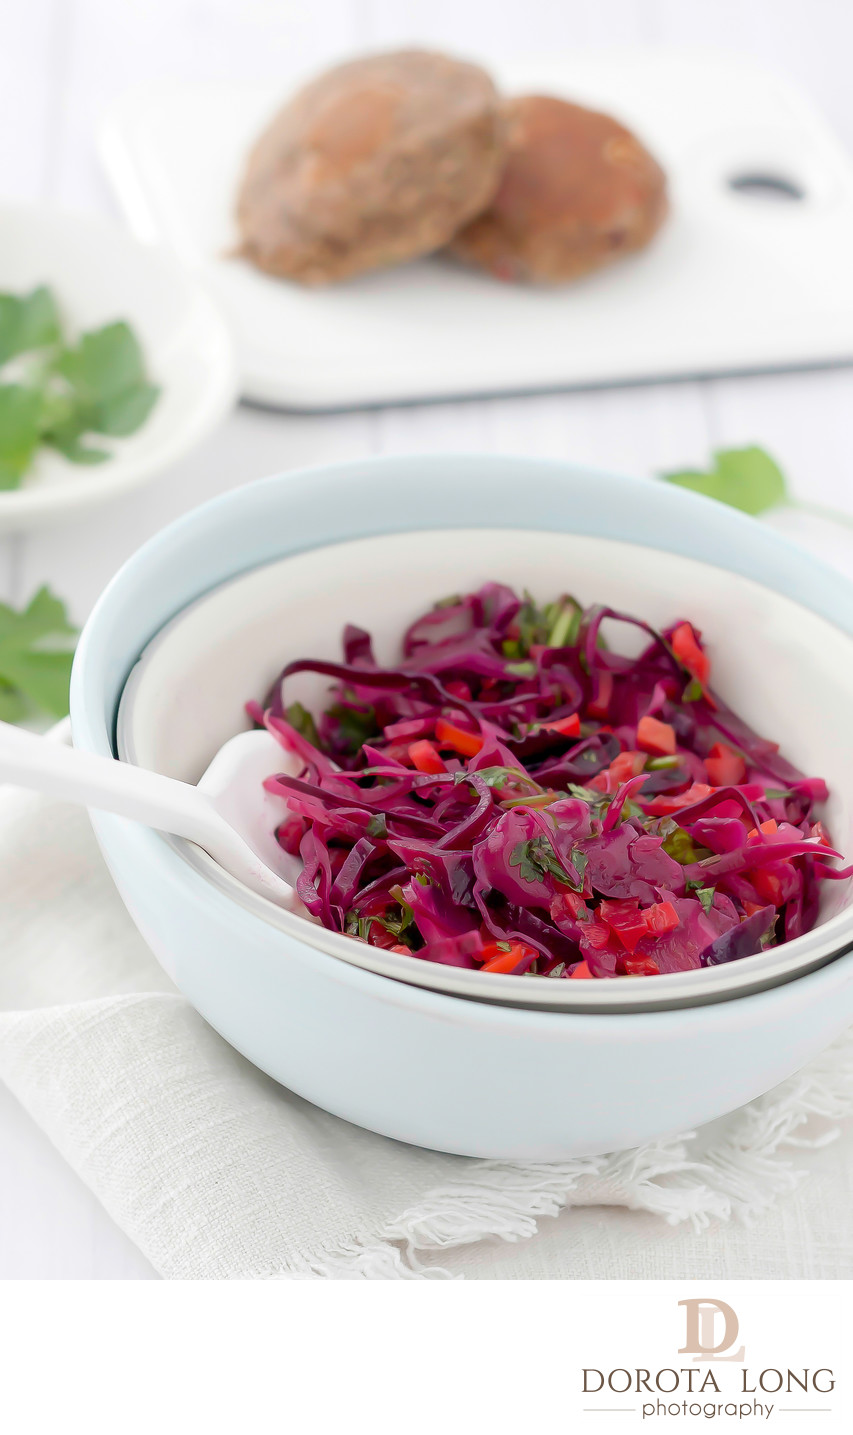 coleslaw made with red cabbage